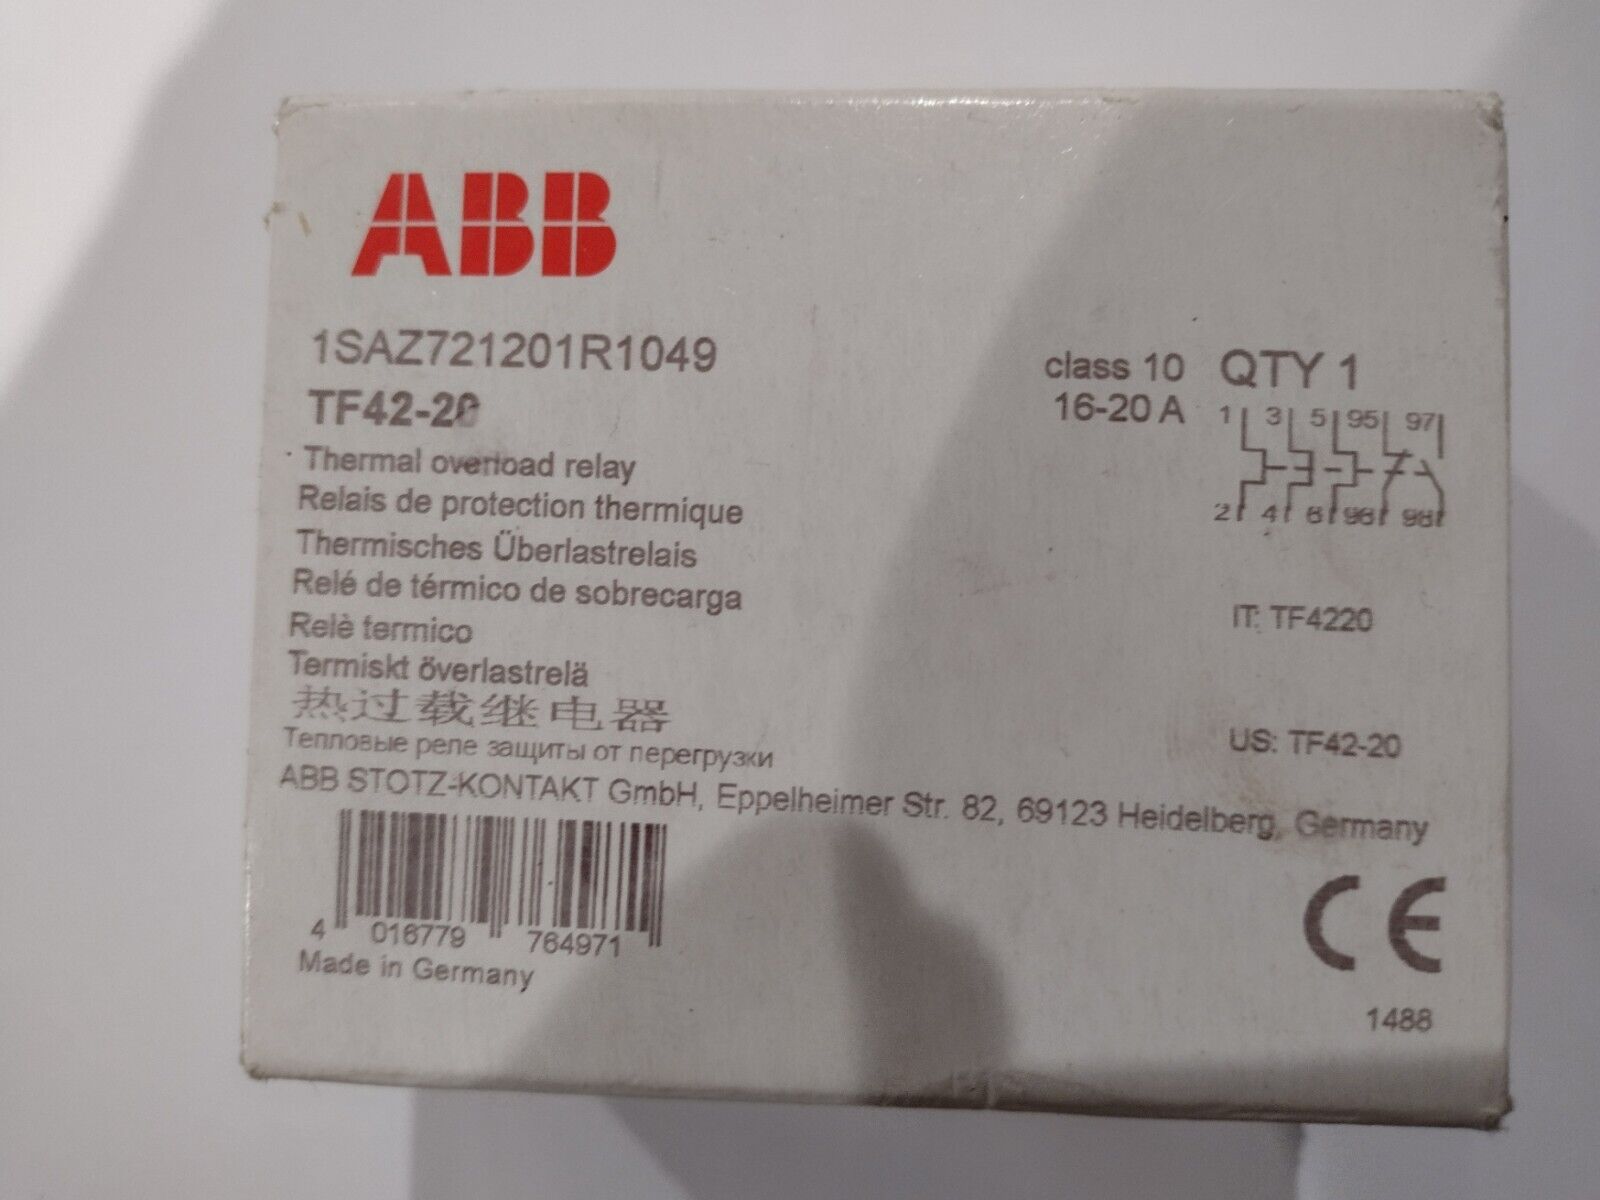 ABB TF42-20 Thermal Overload Relay, 1SAZ721201R1049